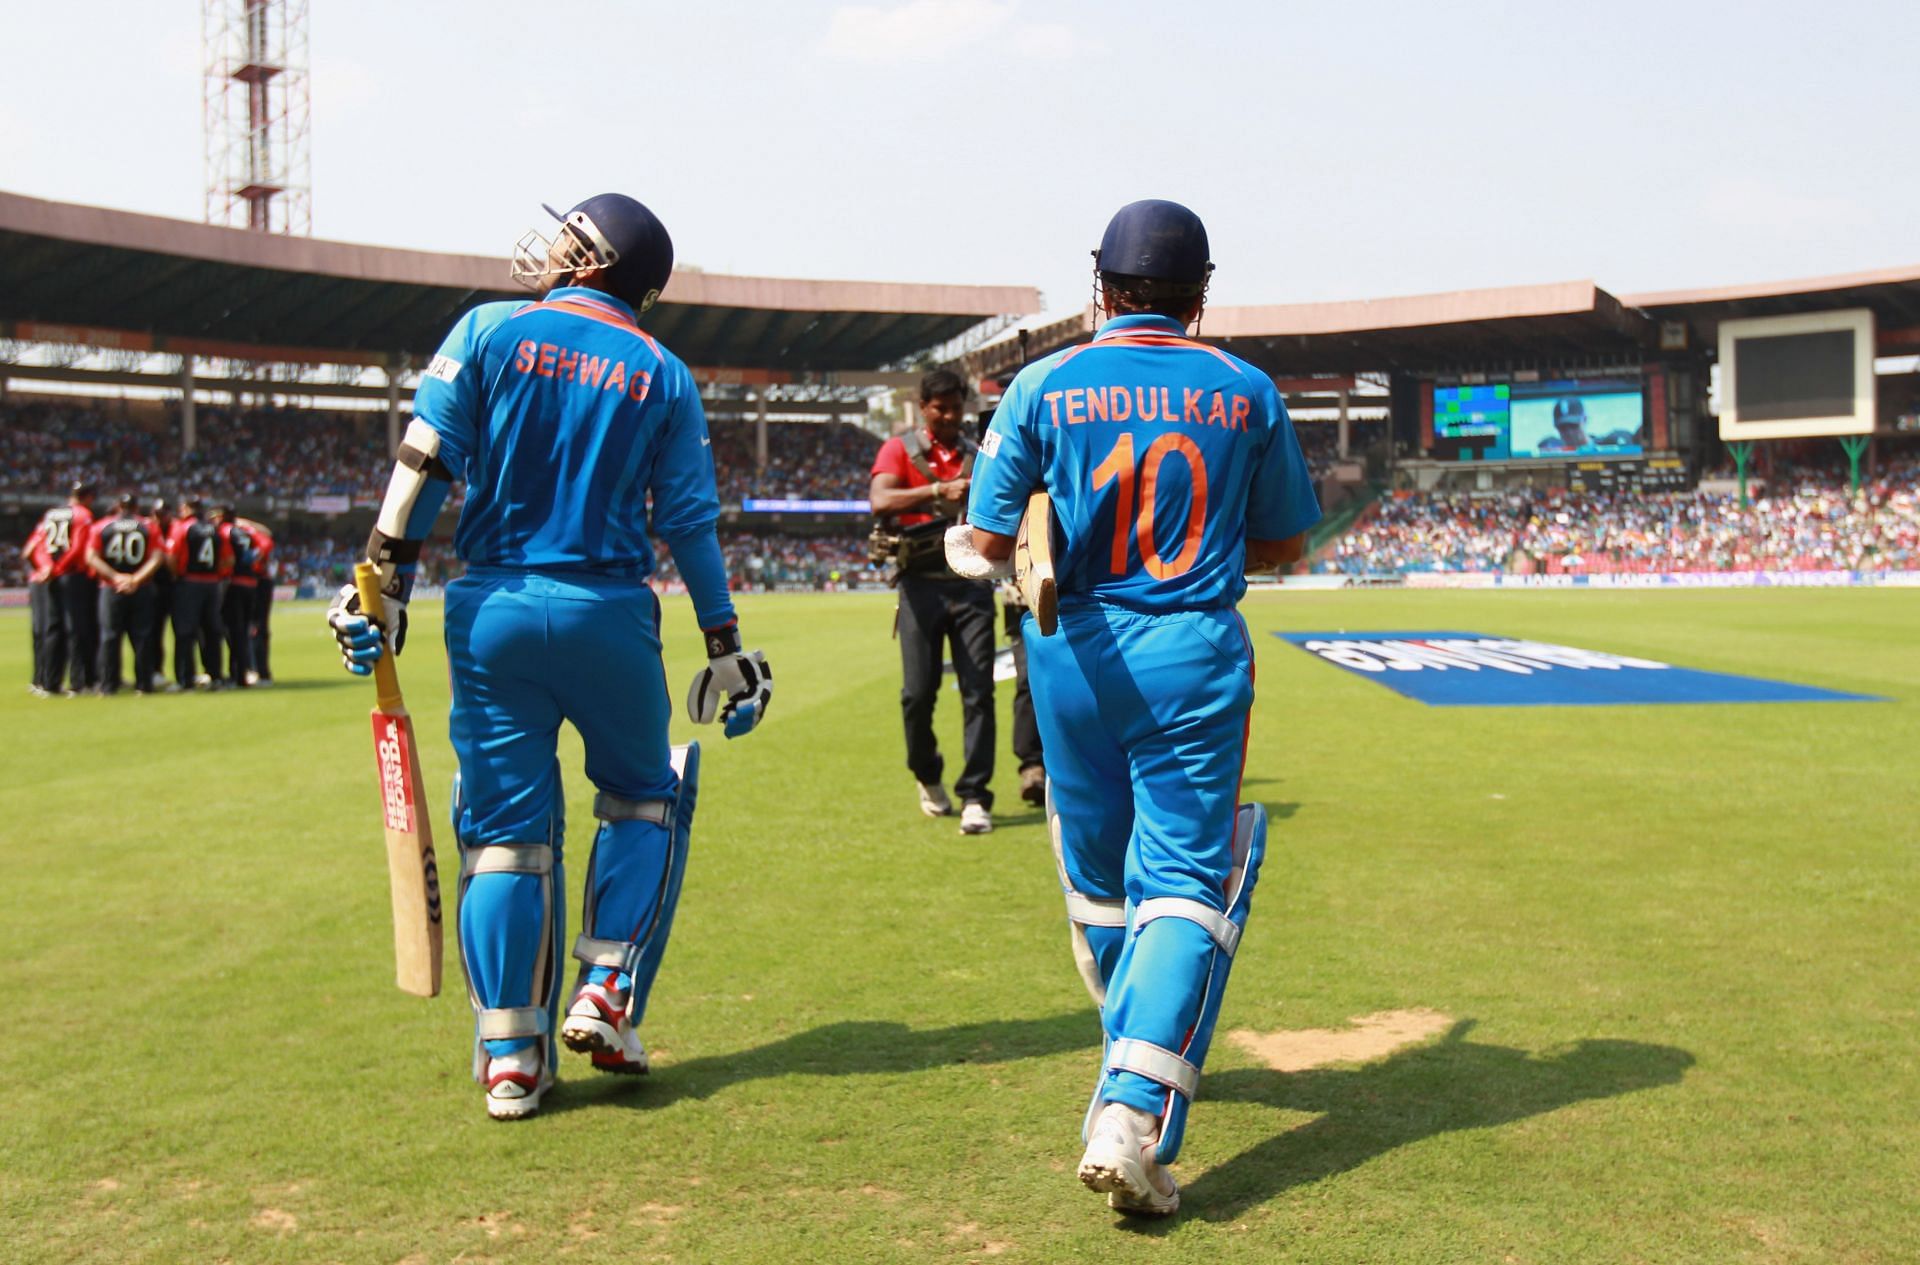 Sehwag and Tendulkar - an iconic duo (File image; Getty).